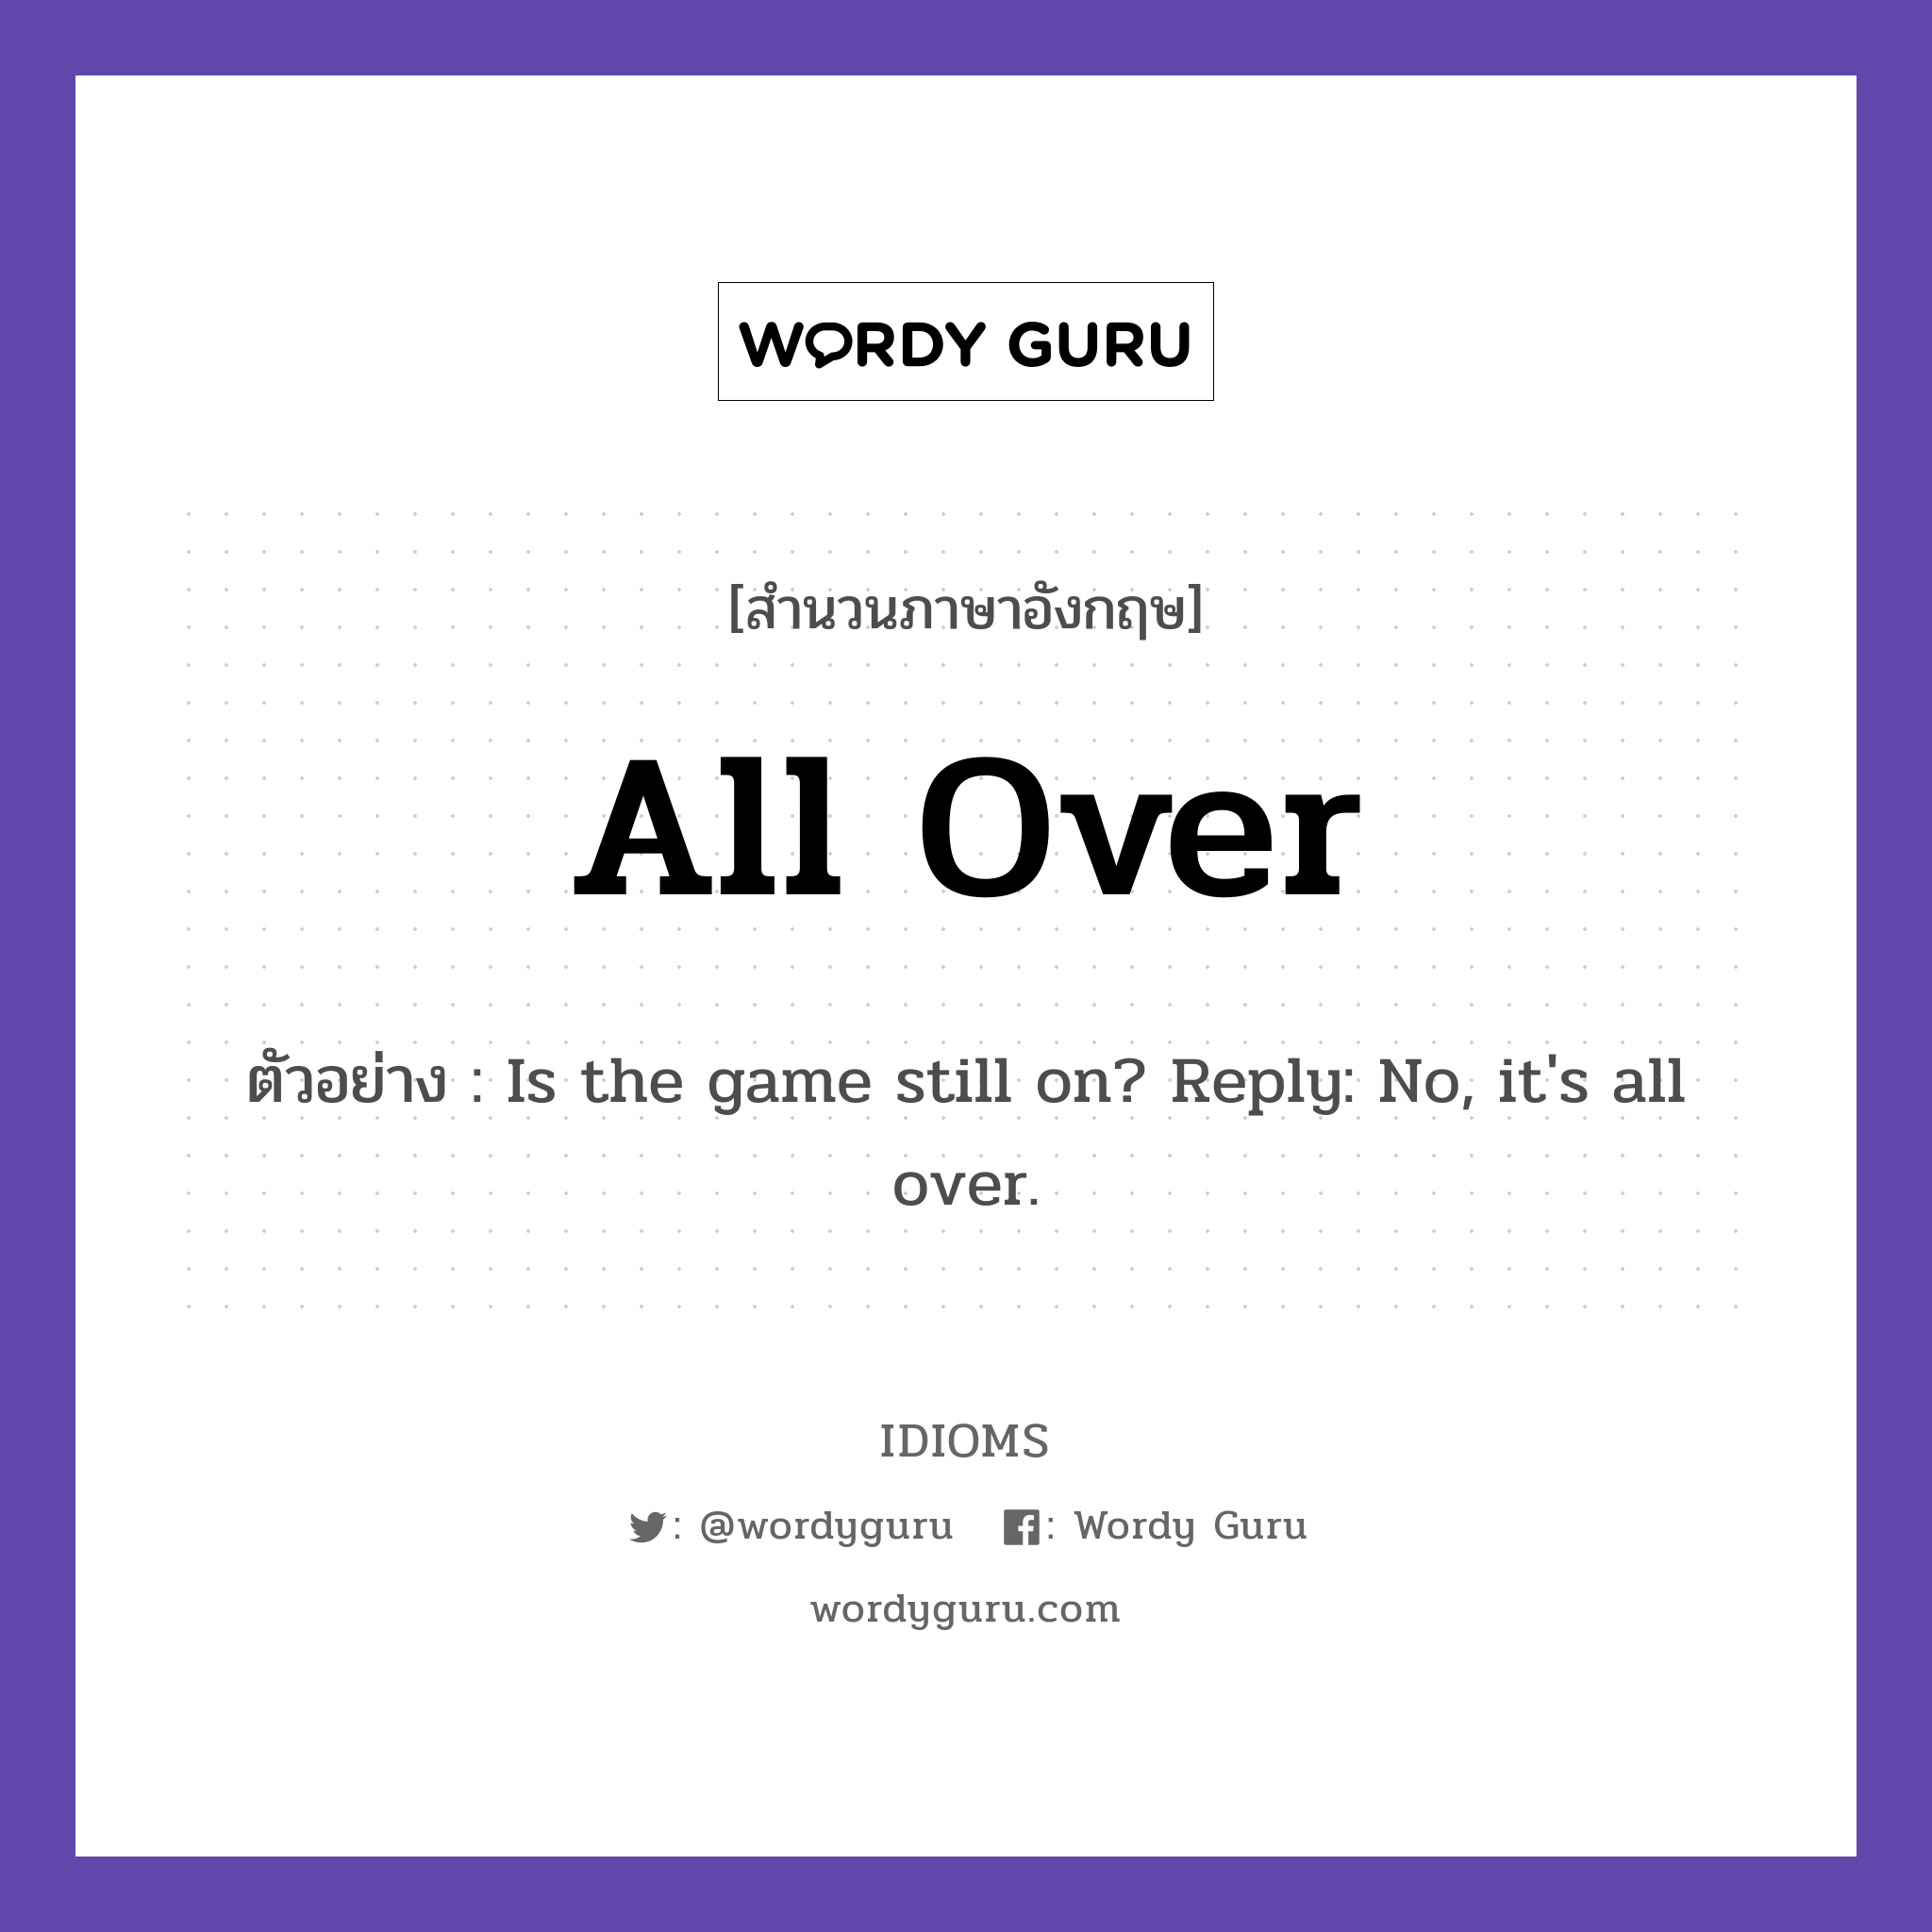 All Over แปลว่า?, สำนวนภาษาอังกฤษ All Over ตัวอย่าง Is the game still on? Reply: No, it's all over.